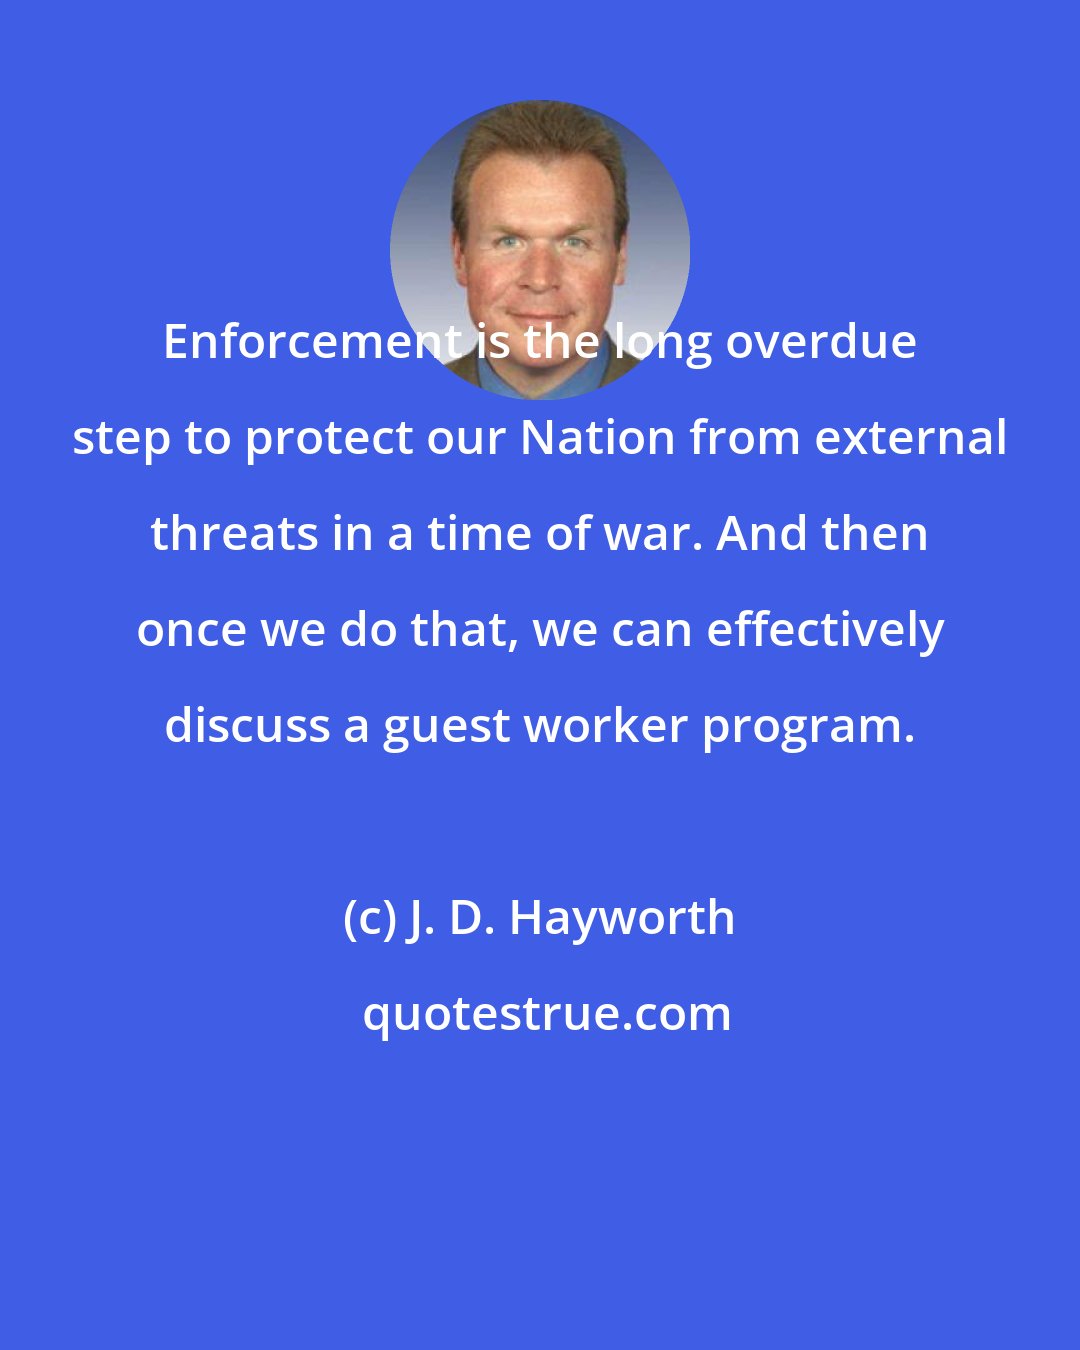 J. D. Hayworth: Enforcement is the long overdue step to protect our Nation from external threats in a time of war. And then once we do that, we can effectively discuss a guest worker program.